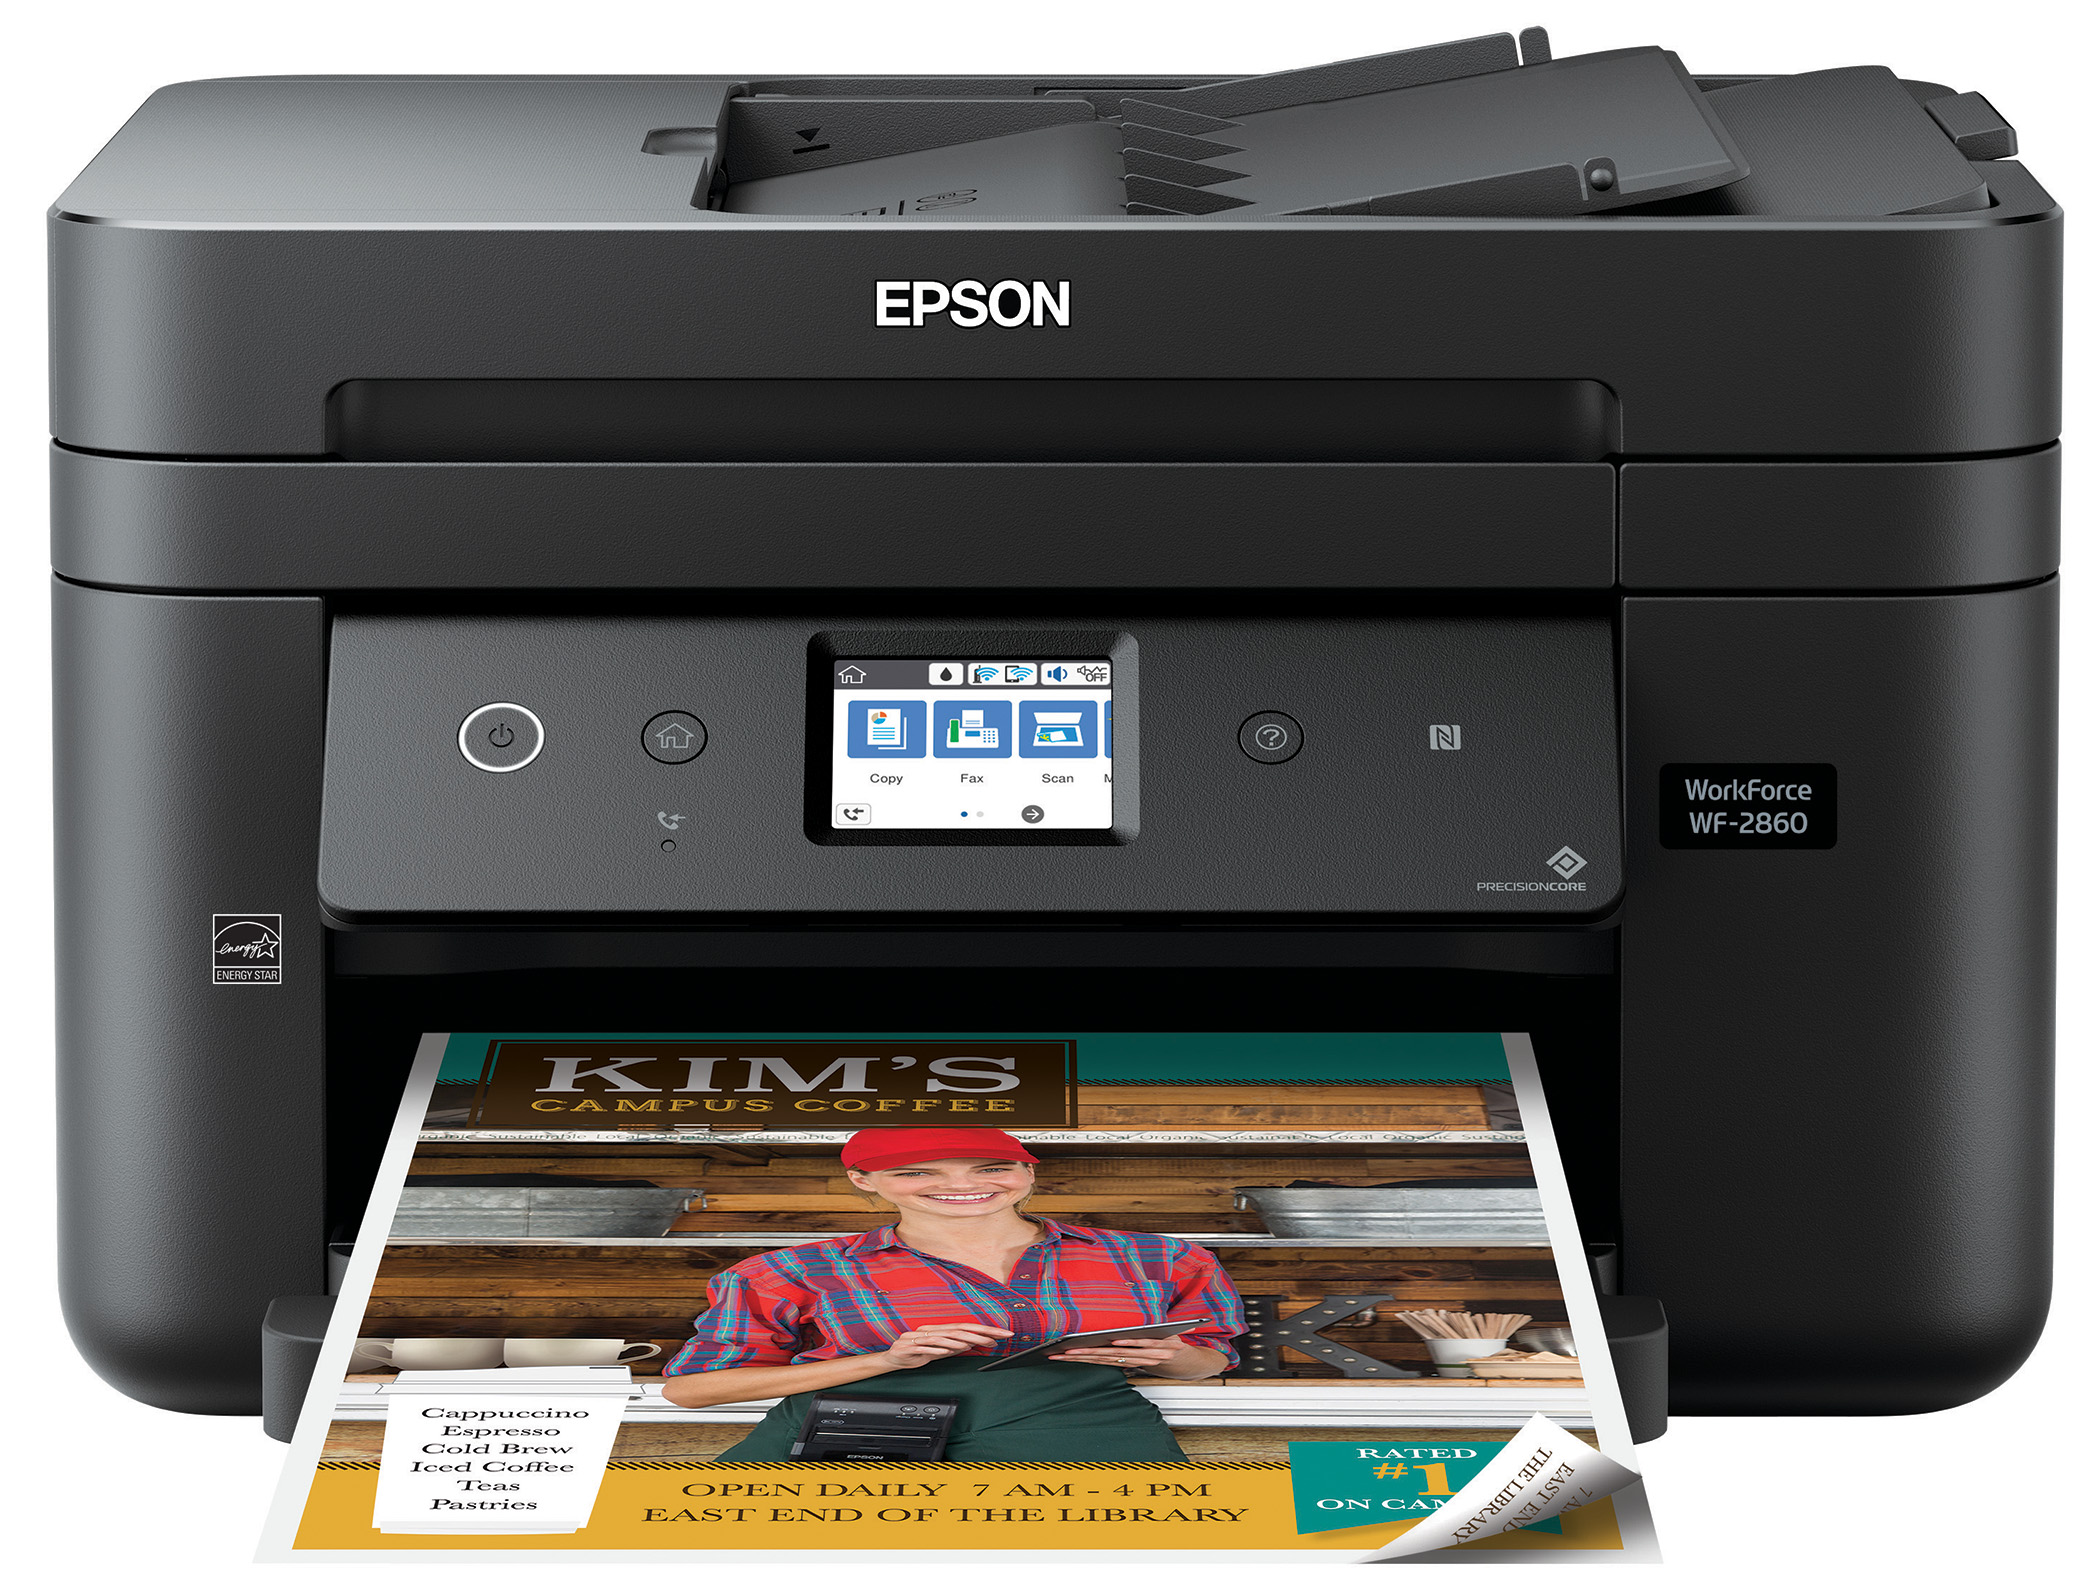 Epson WorkForce WF-2860 All-in-One Wireless Color Printer with Scanner, Copier, Fax, Ethernet, Wi-Fi Direct and NFC - image 1 of 6